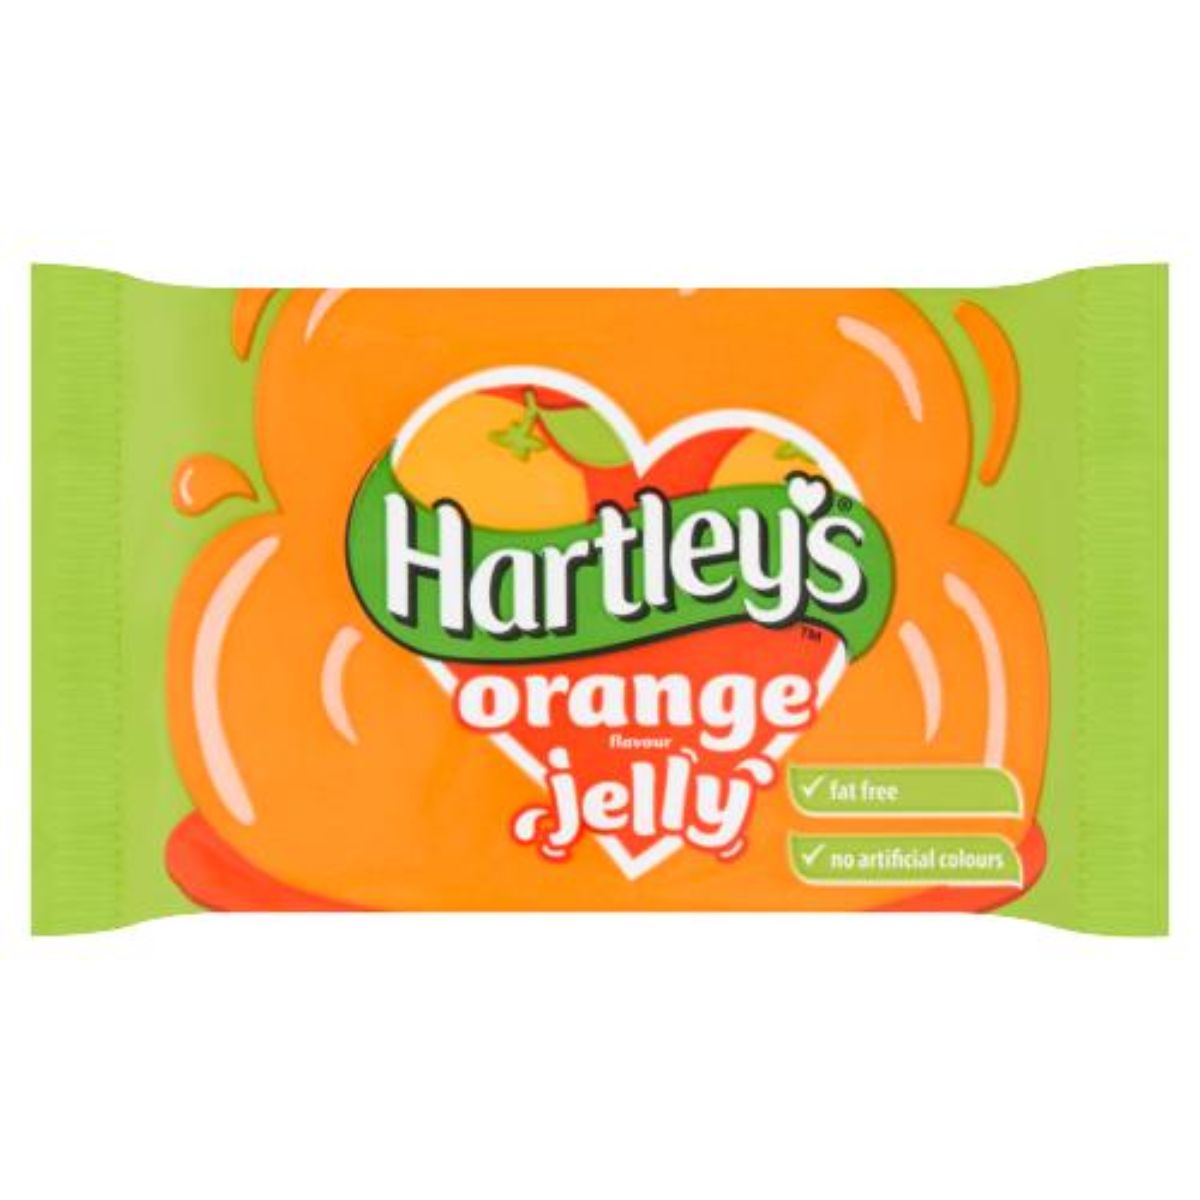 A packet of Hartley's - Orange Flavour Jelly - 135g, labeled as fat-free and containing no artificial colors.